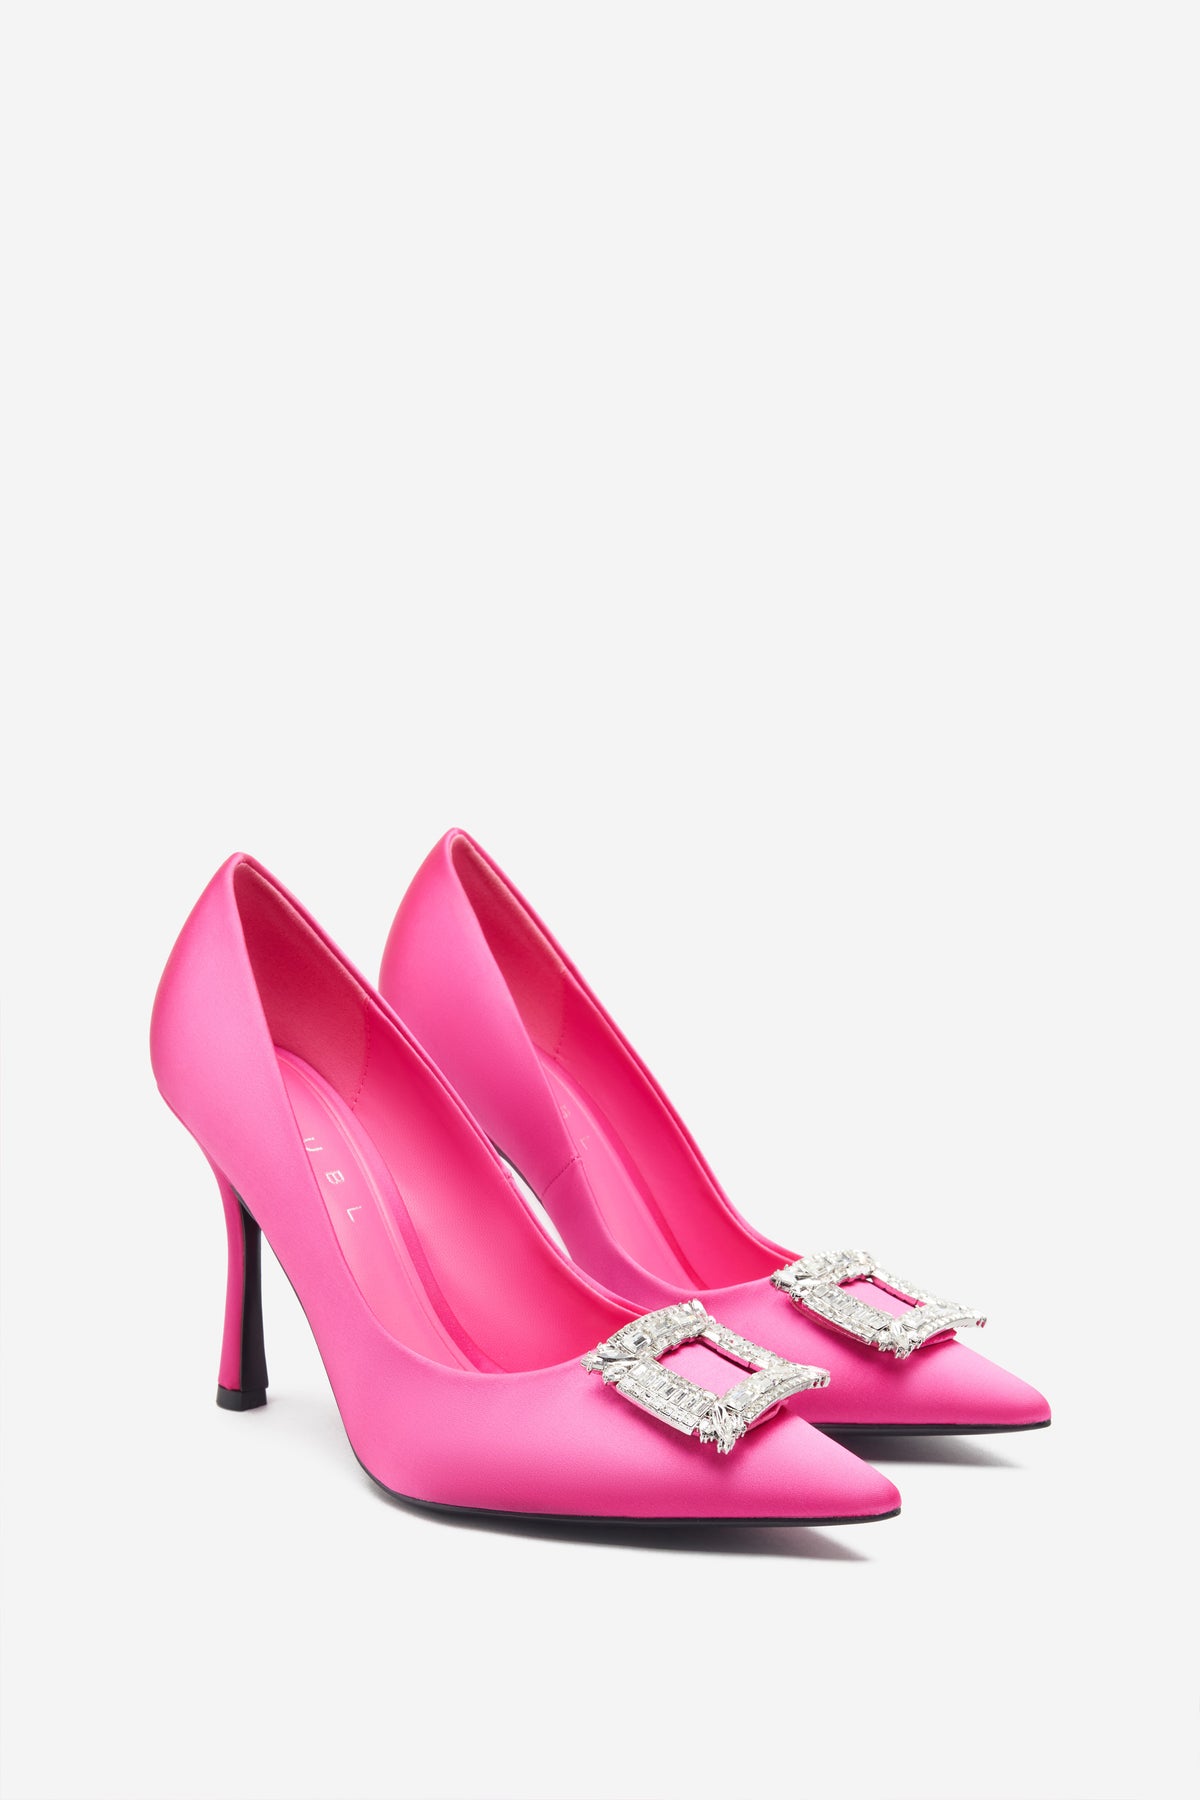 Lawless Hot Pink Satin Pointed Court Heels With Diamante Brooches ...